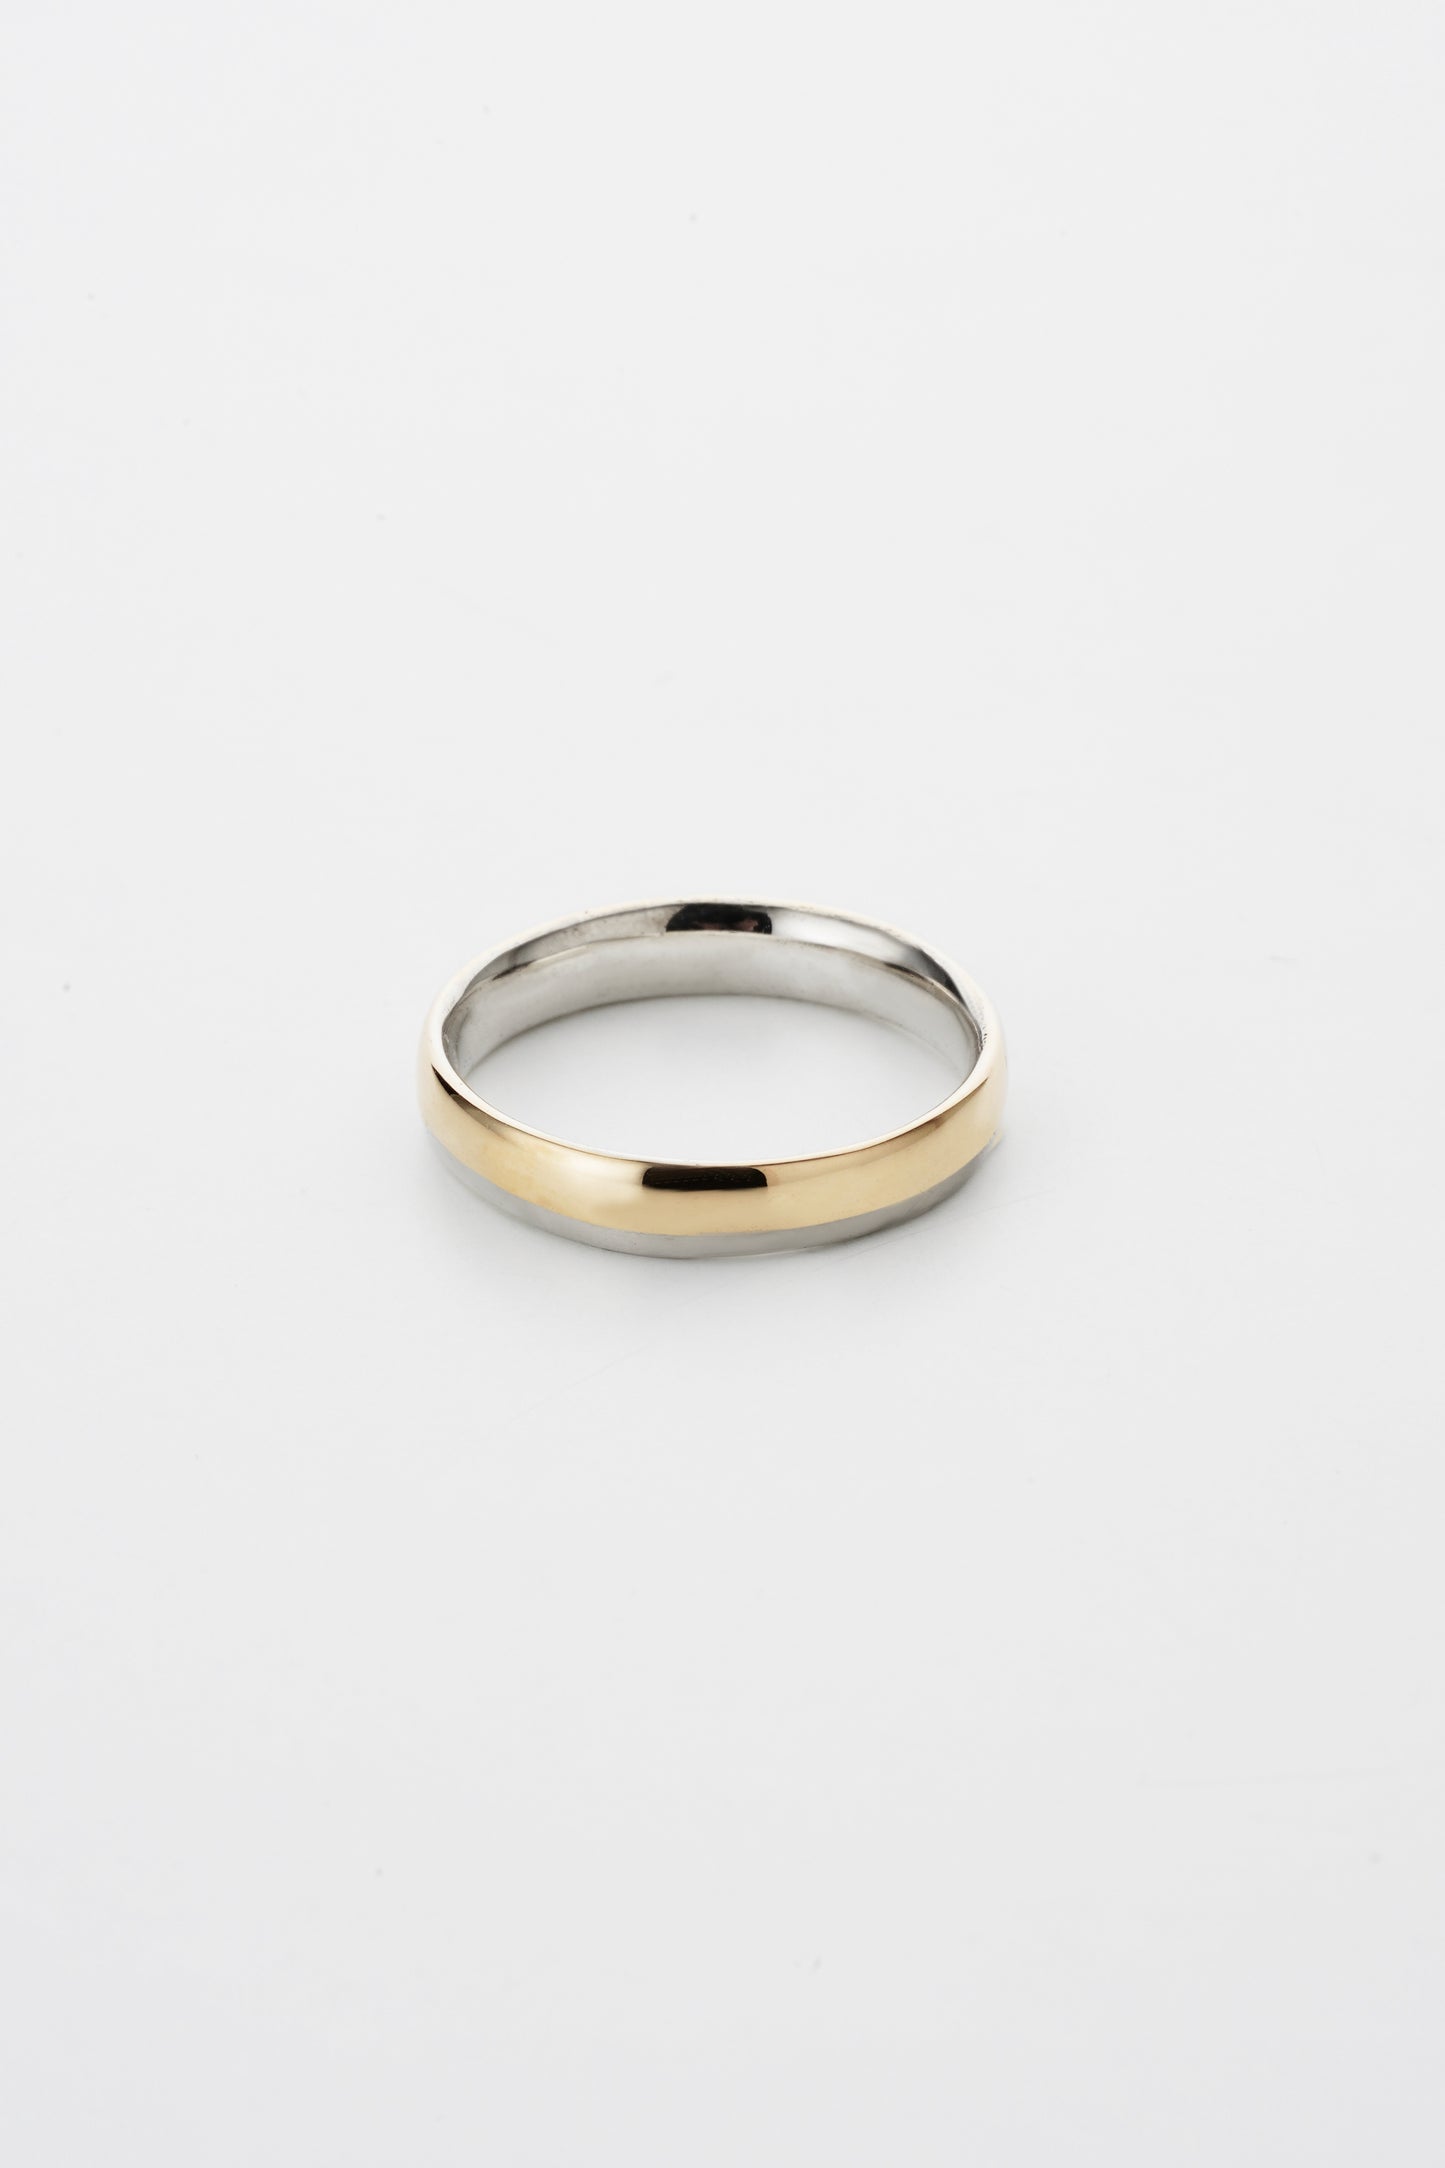 ISIR / mh ring 3mm　MH001-20R-K10S